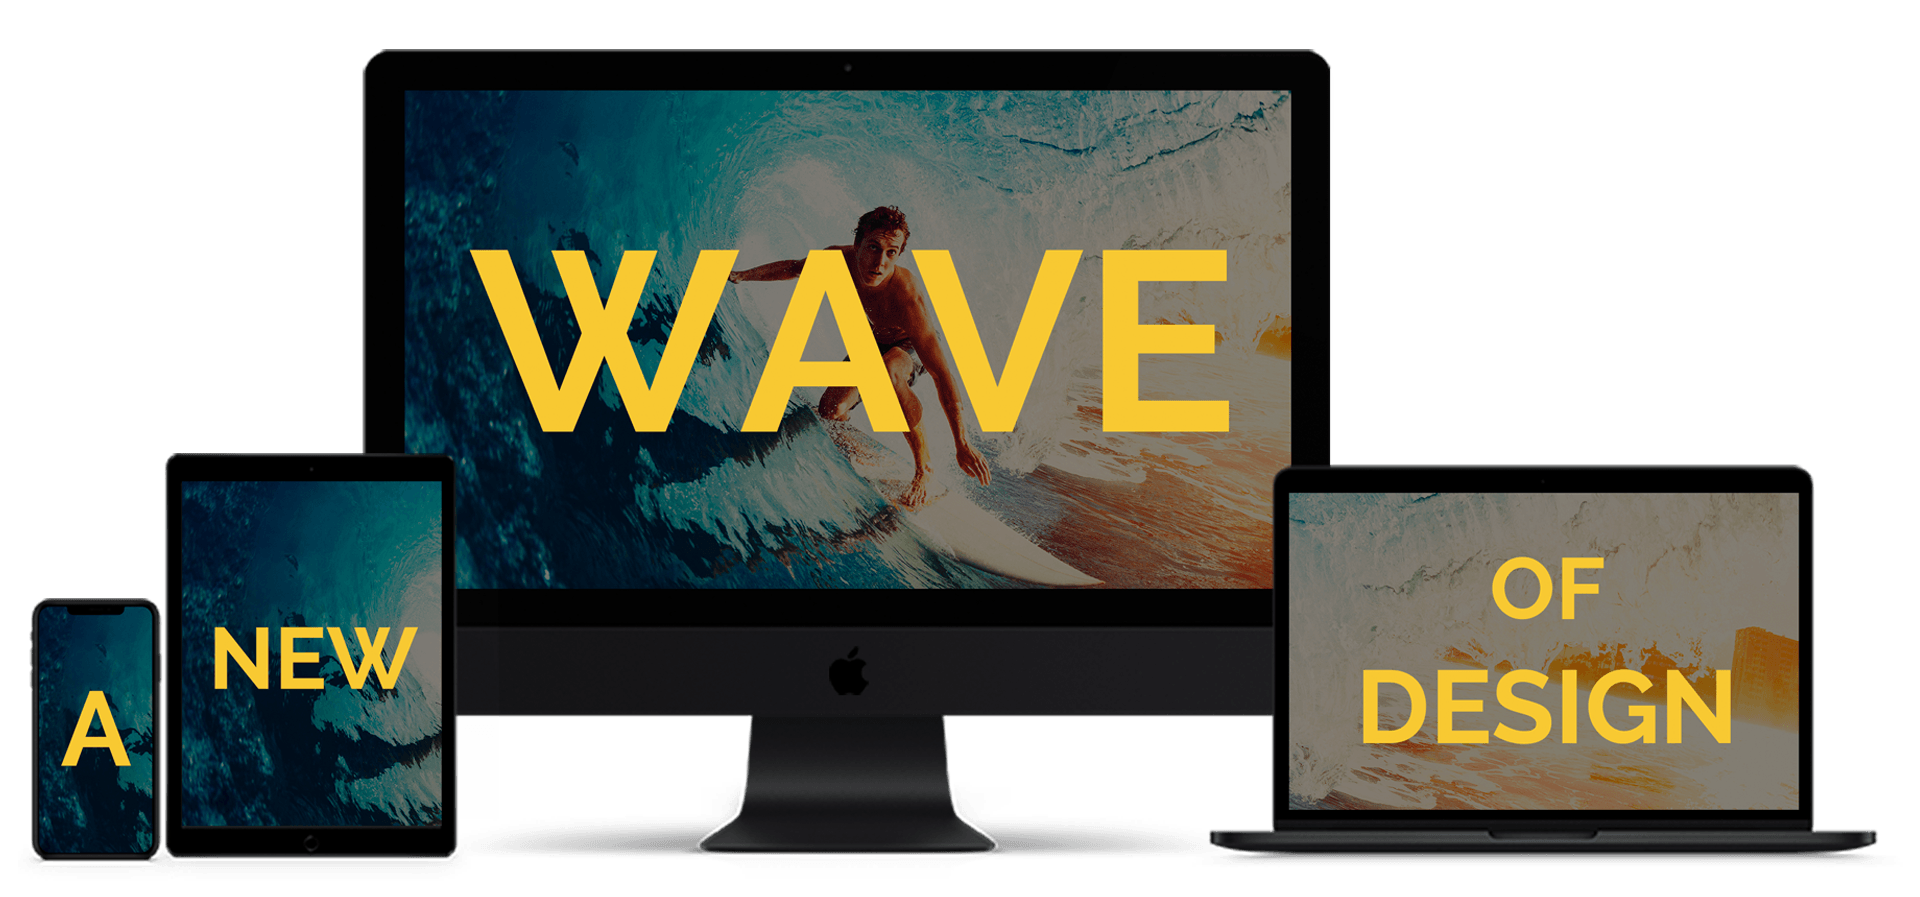 A New Wave of Design